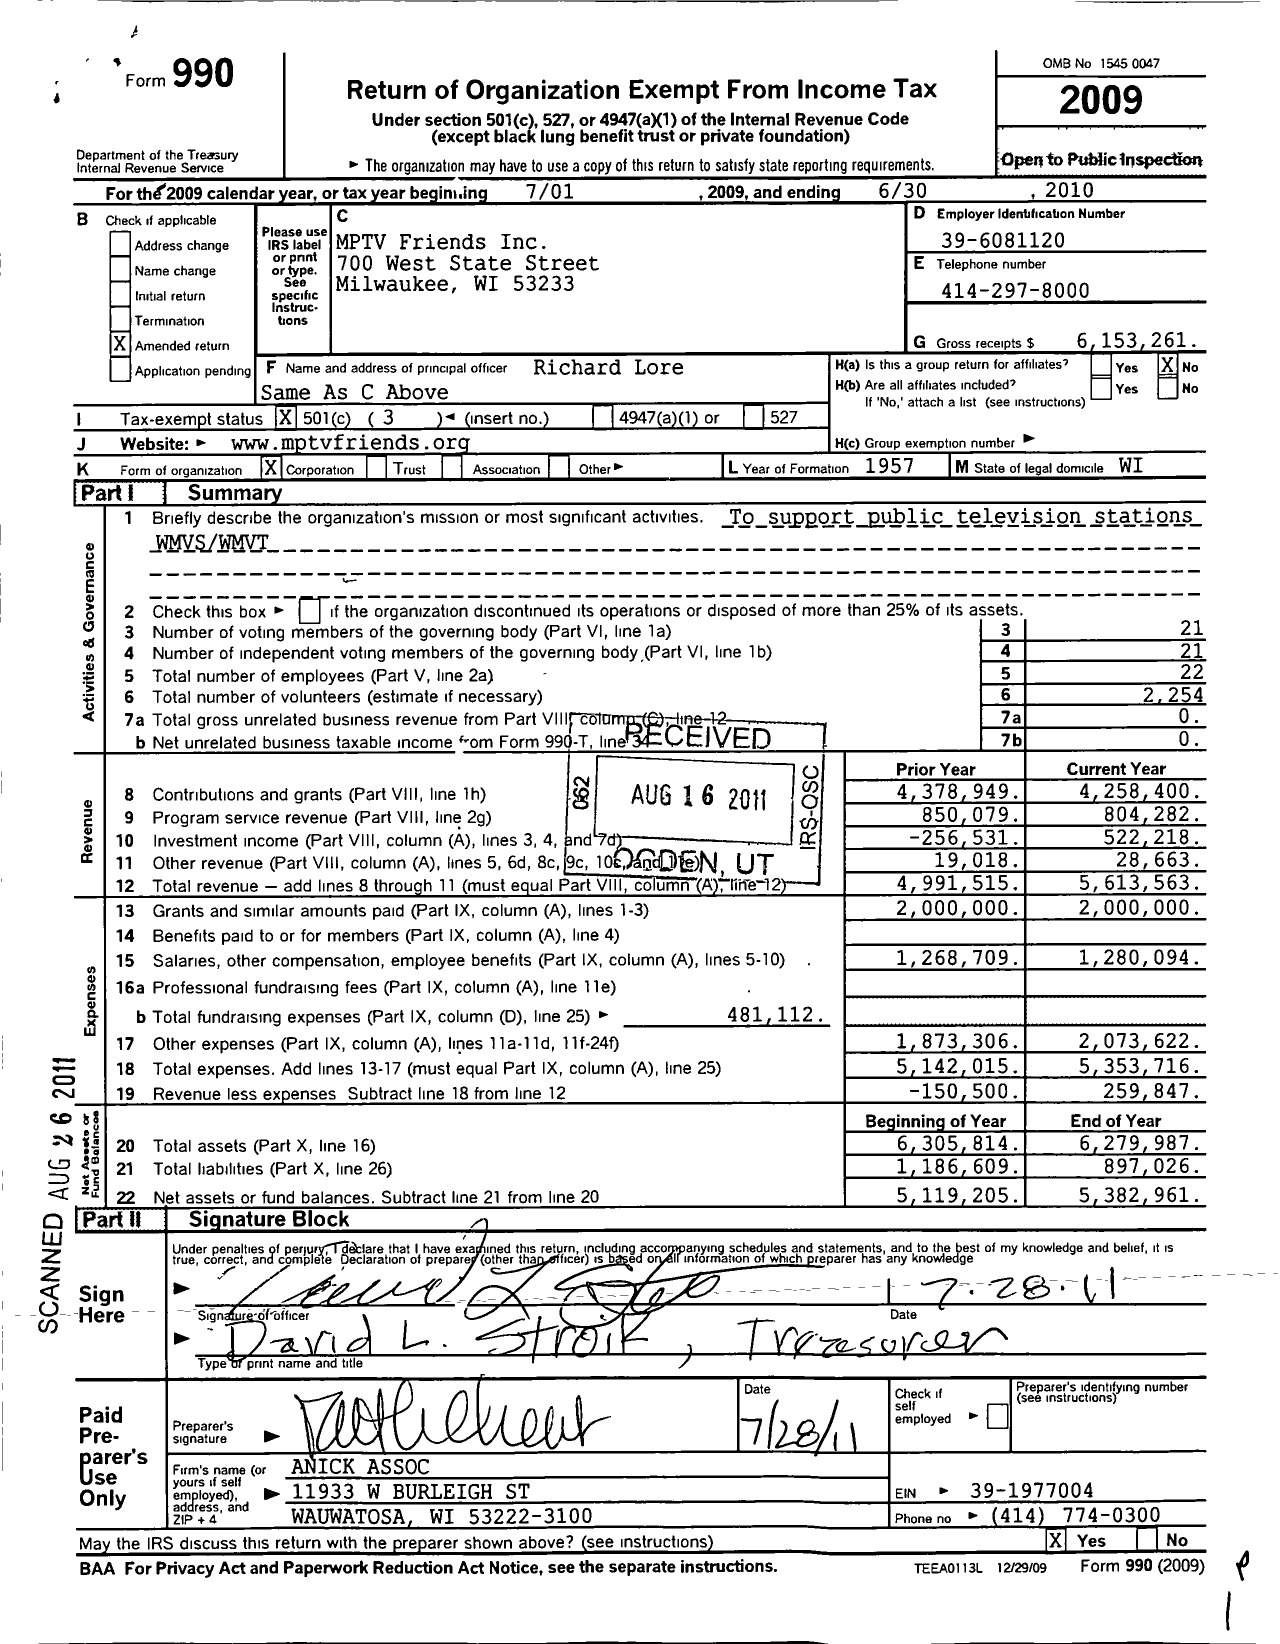 Image of first page of 2009 Form 990 for Milwaukee Public Television (MPTV)